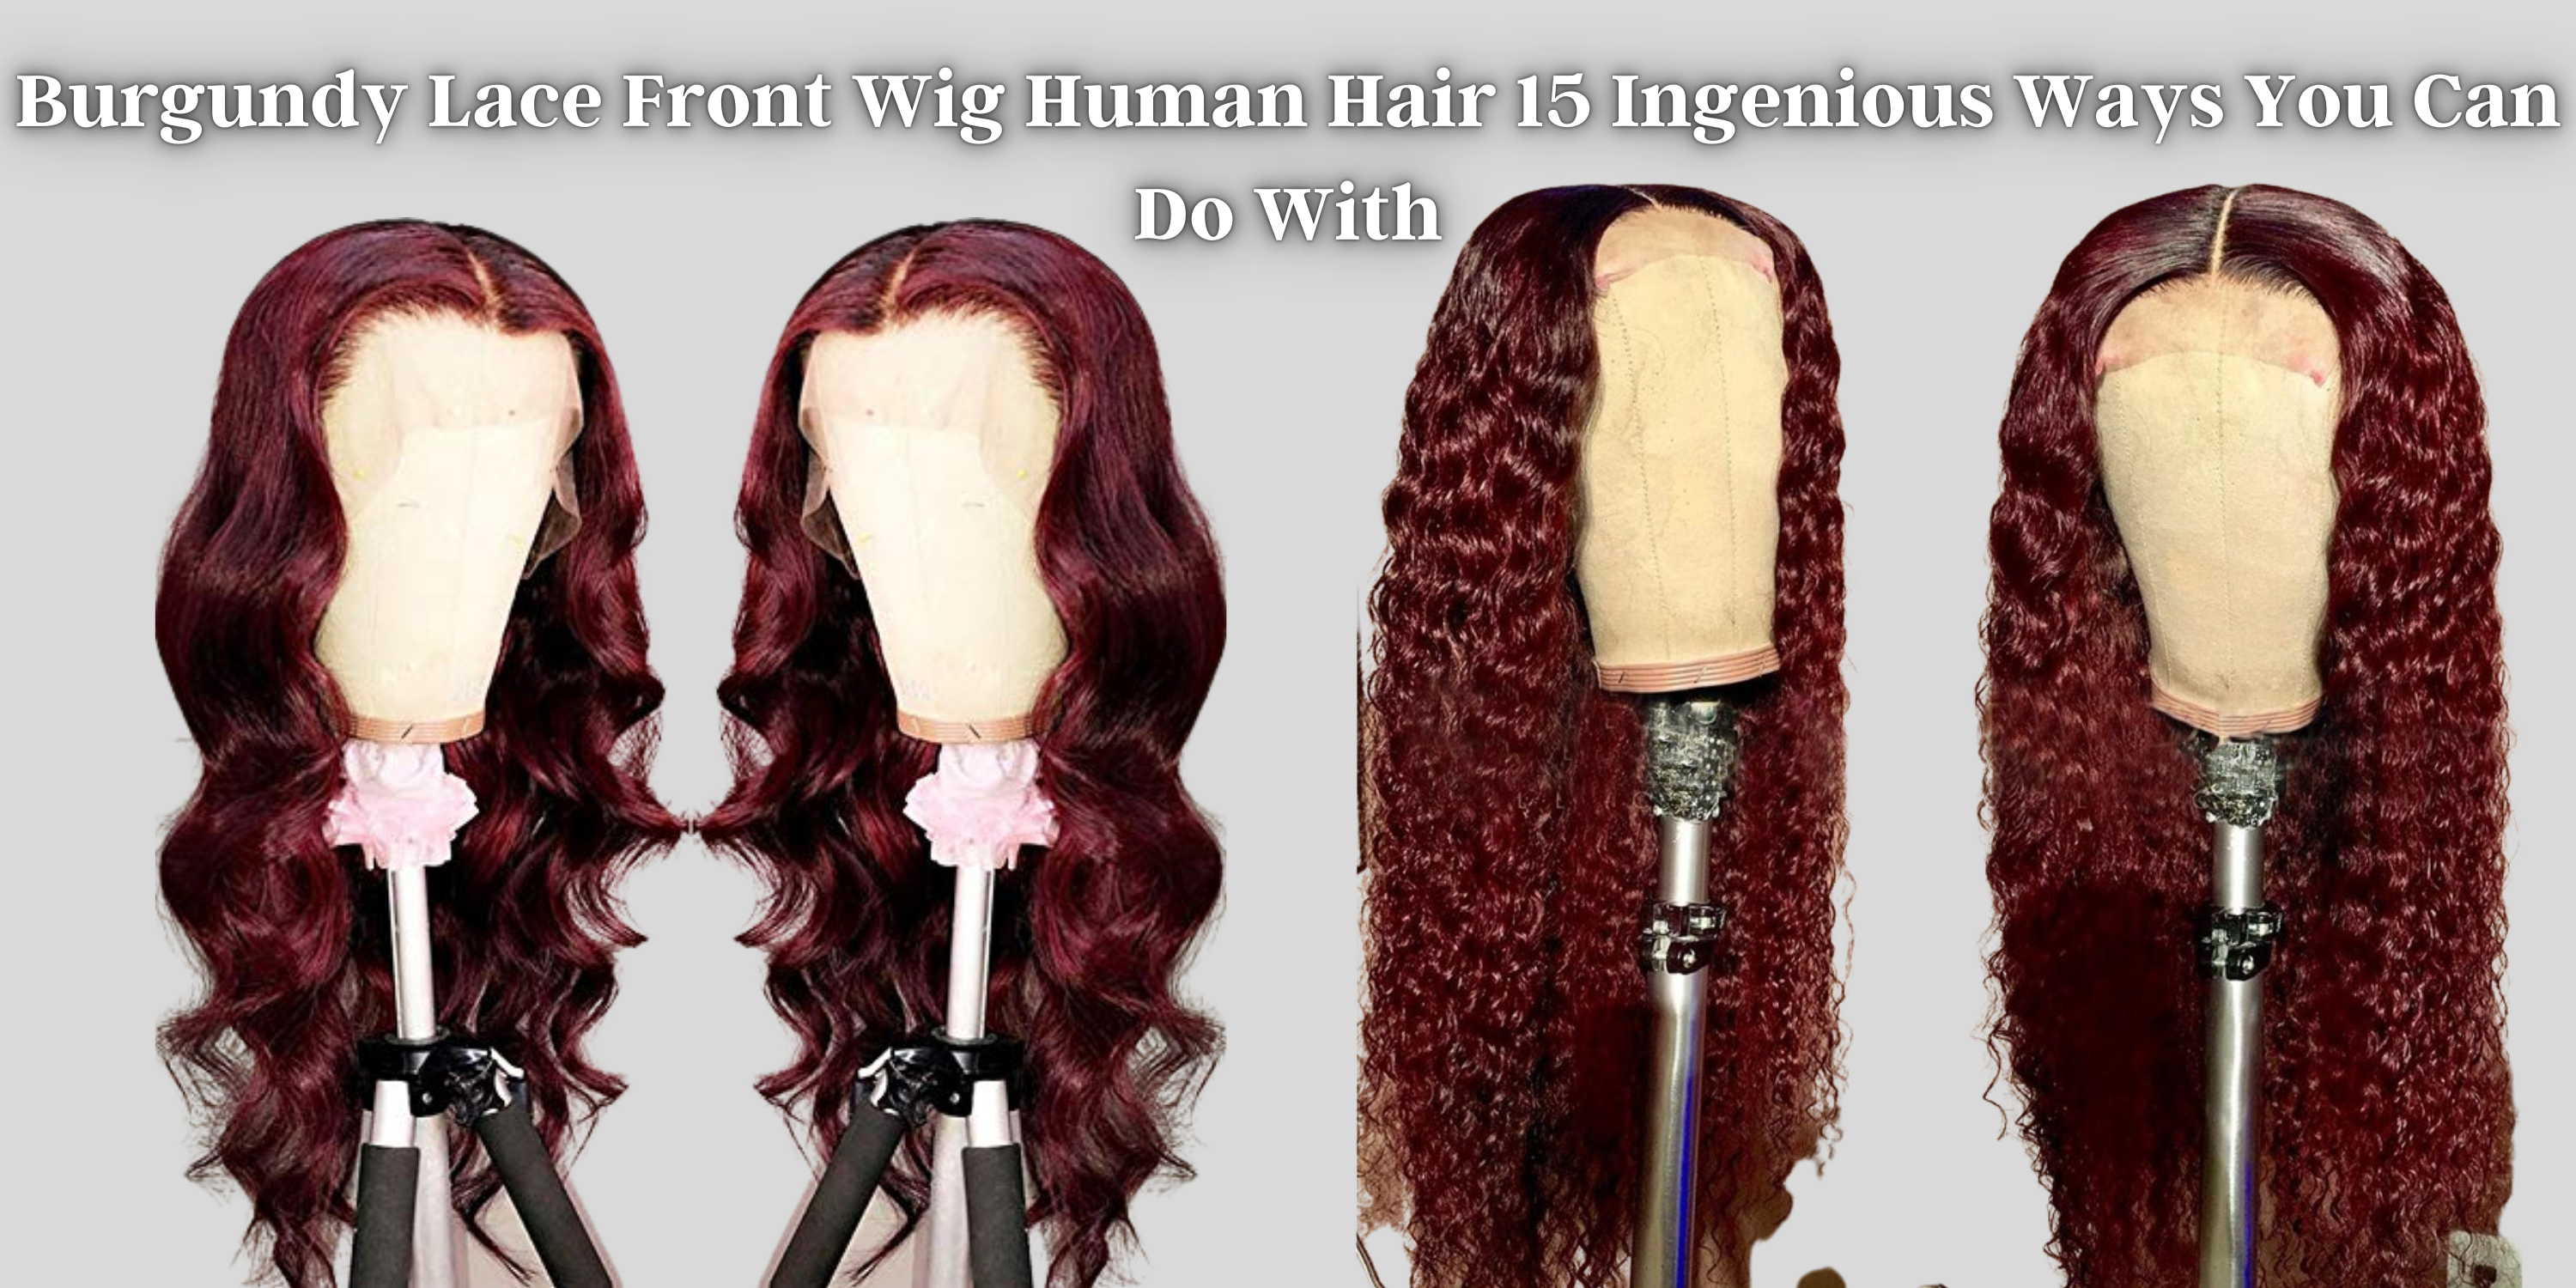 Burgundy Lace Front Wig Human Hair: 15 Ingenious Ways You Can Do With